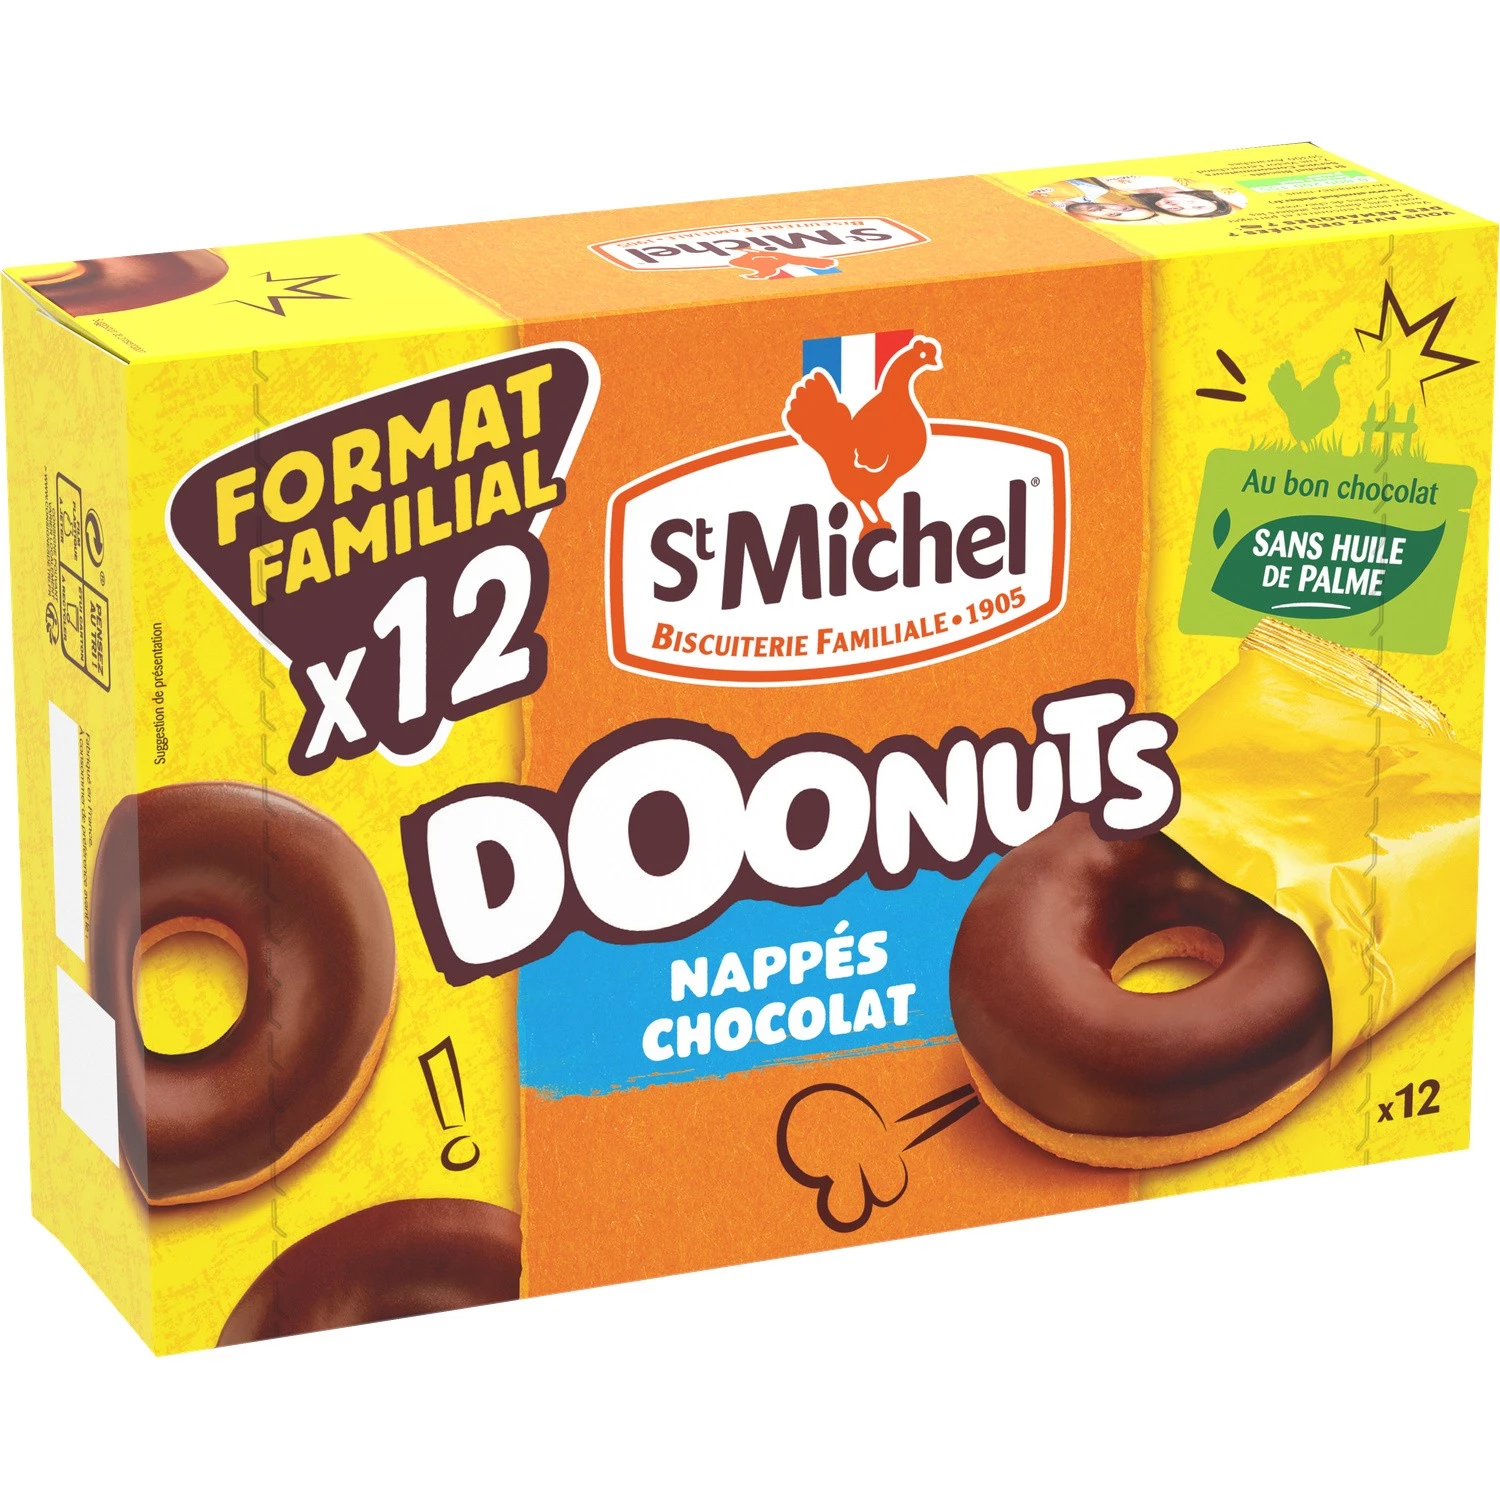 Doonuts cakes covered in chocolate 360g - ST MICHEL